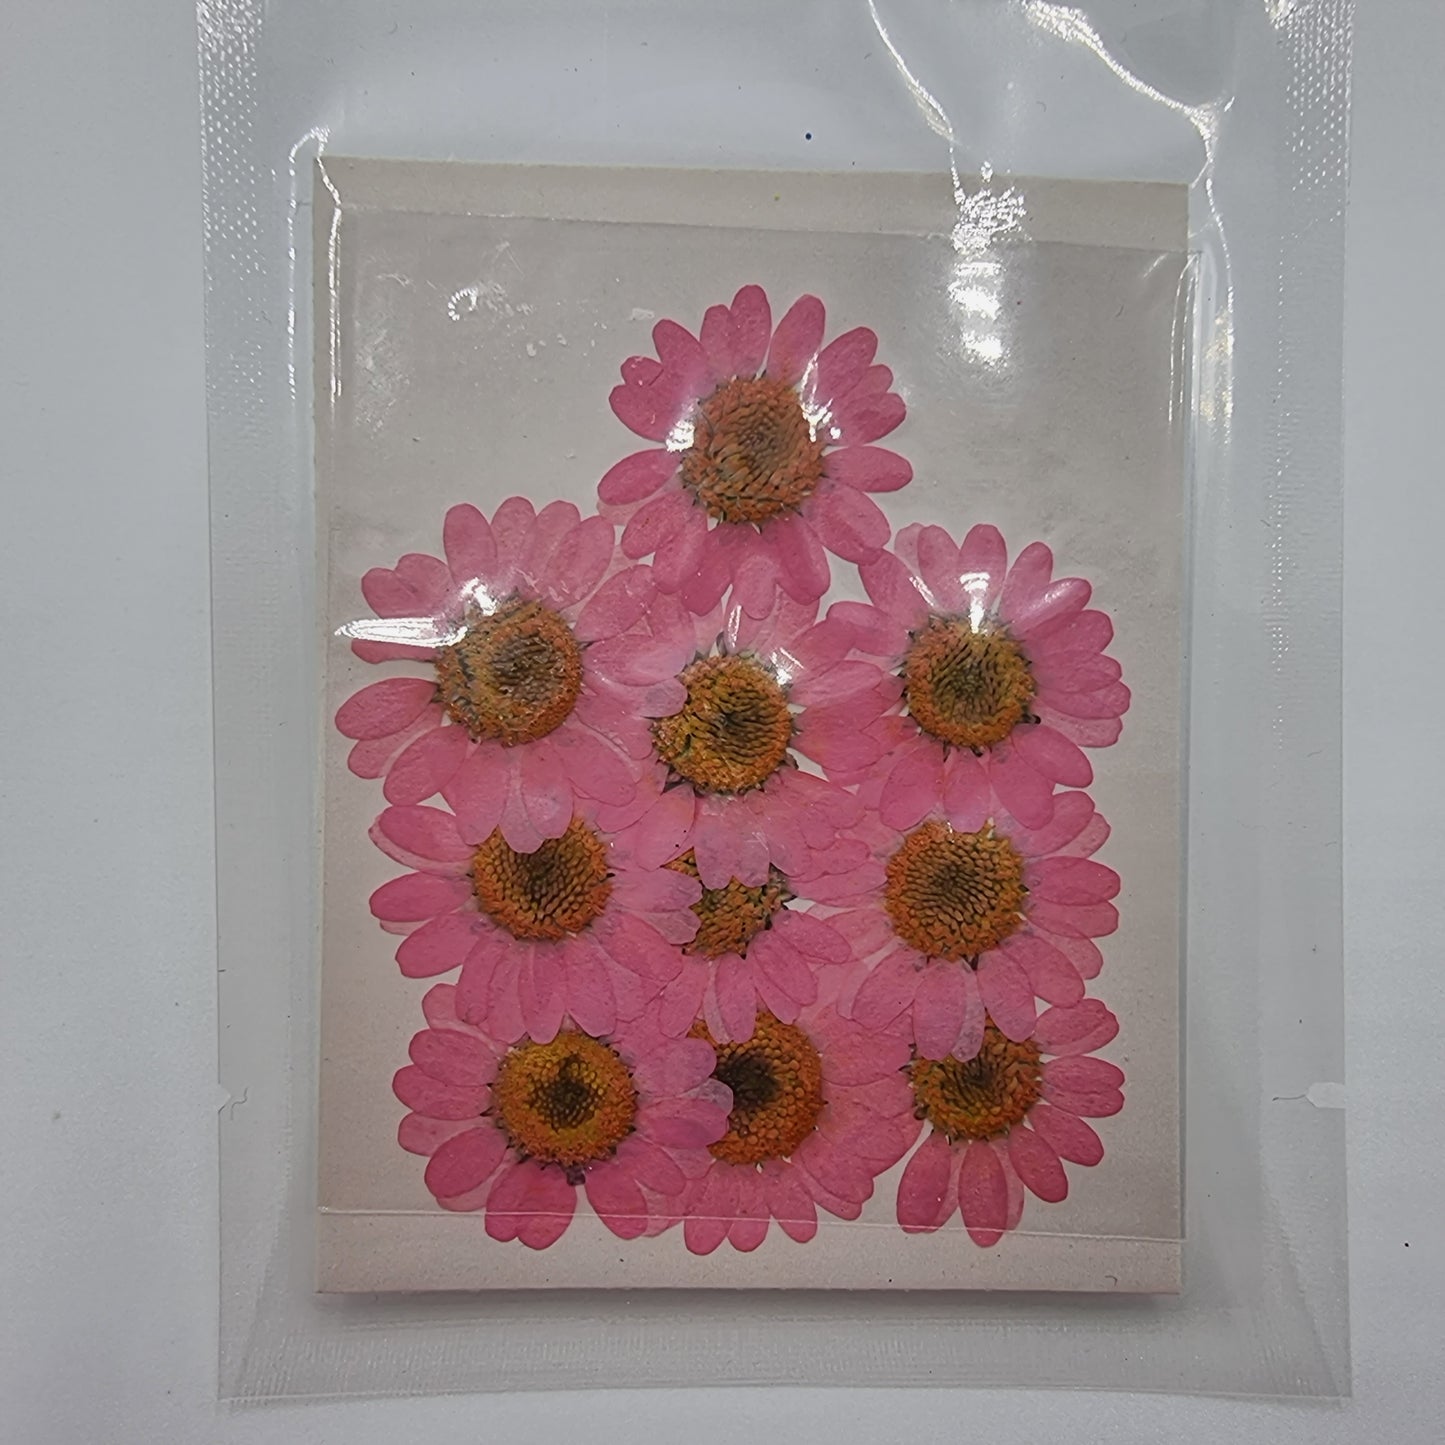 Dried Pressed Flowers - Pink Daisies Small - Mystic Art Glitters